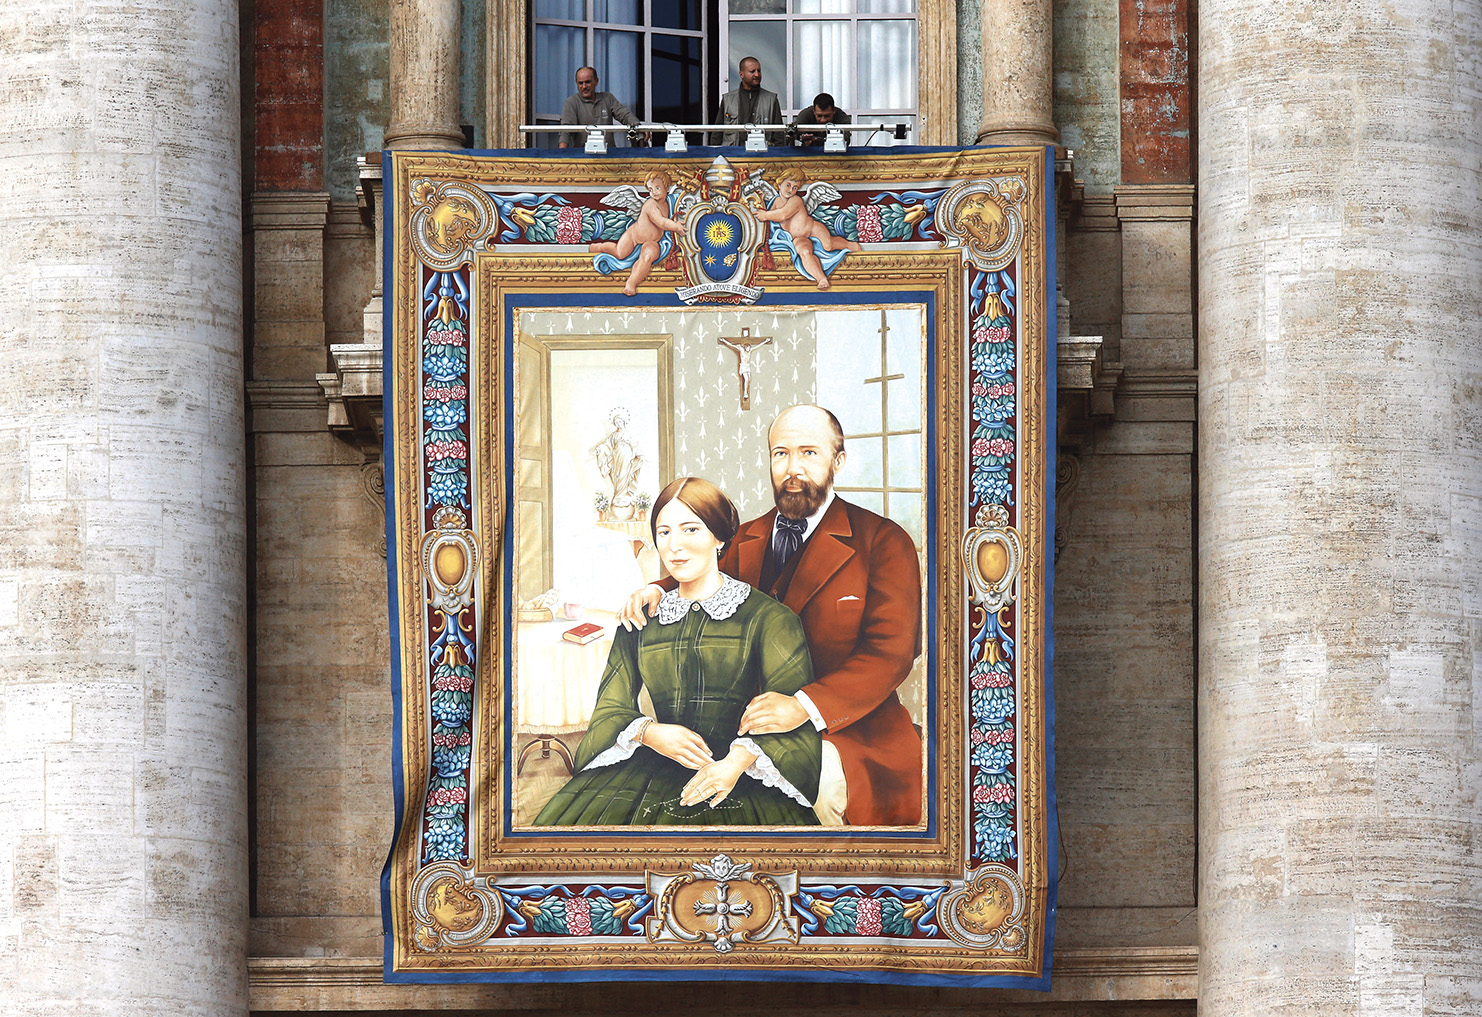 A banner of Ss. Louis and Marie Zelie Guerin Martin hangs on the facade of St. Peter’s Basilica at the Vatican in this 2015 file photo. The parents of St. Thérèse of Lisieux were the first married couple to be canonized together on Oct. 18 of that year. (Paul Haring/CNS)